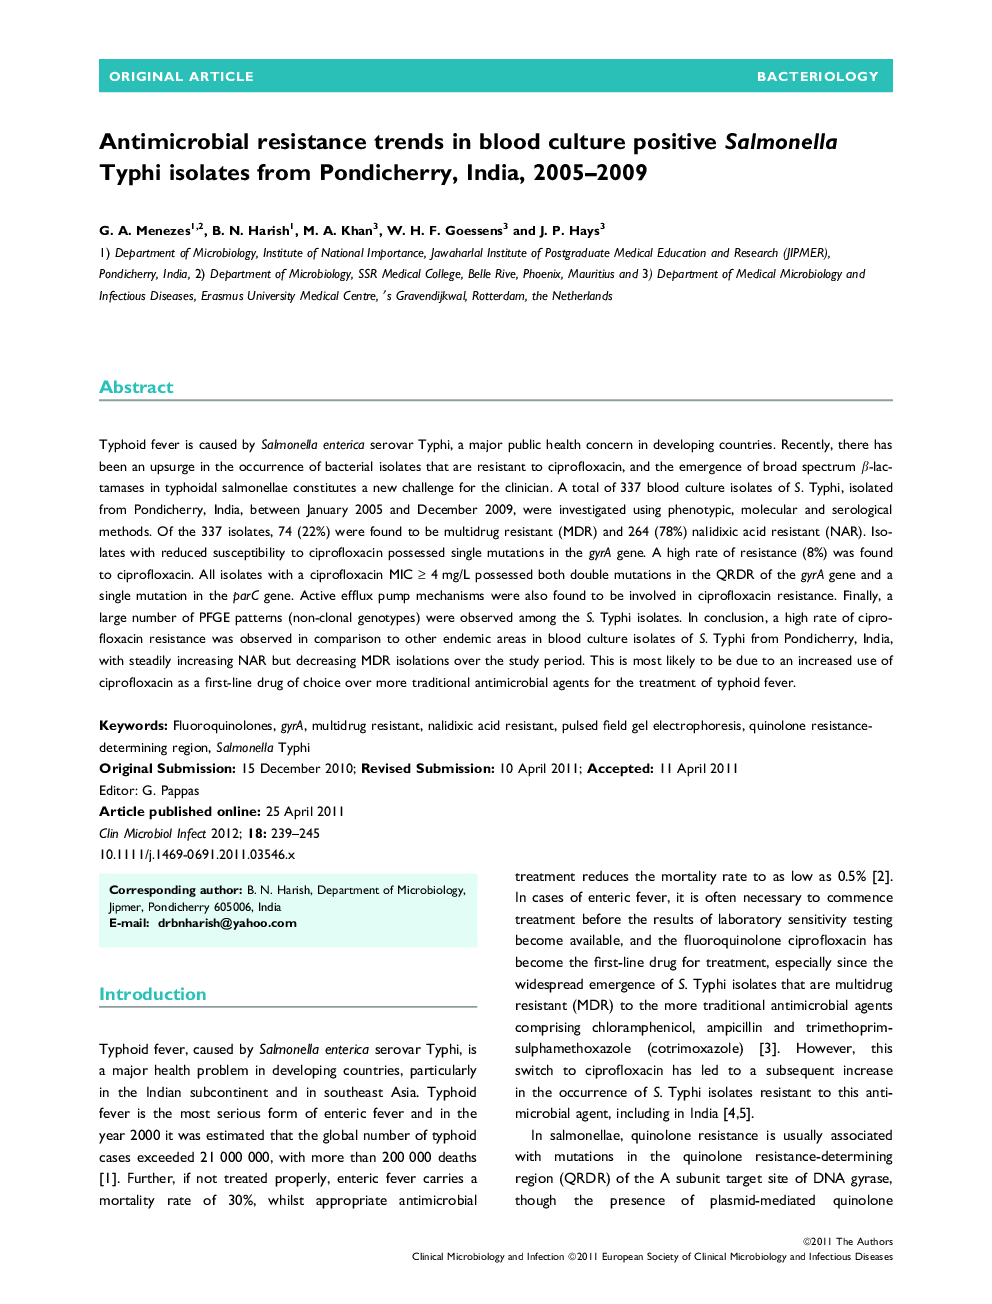 Antimicrobial resistance trends in blood culture positive Salmonella Typhi isolates from Pondicherry, India, 2005–2009 